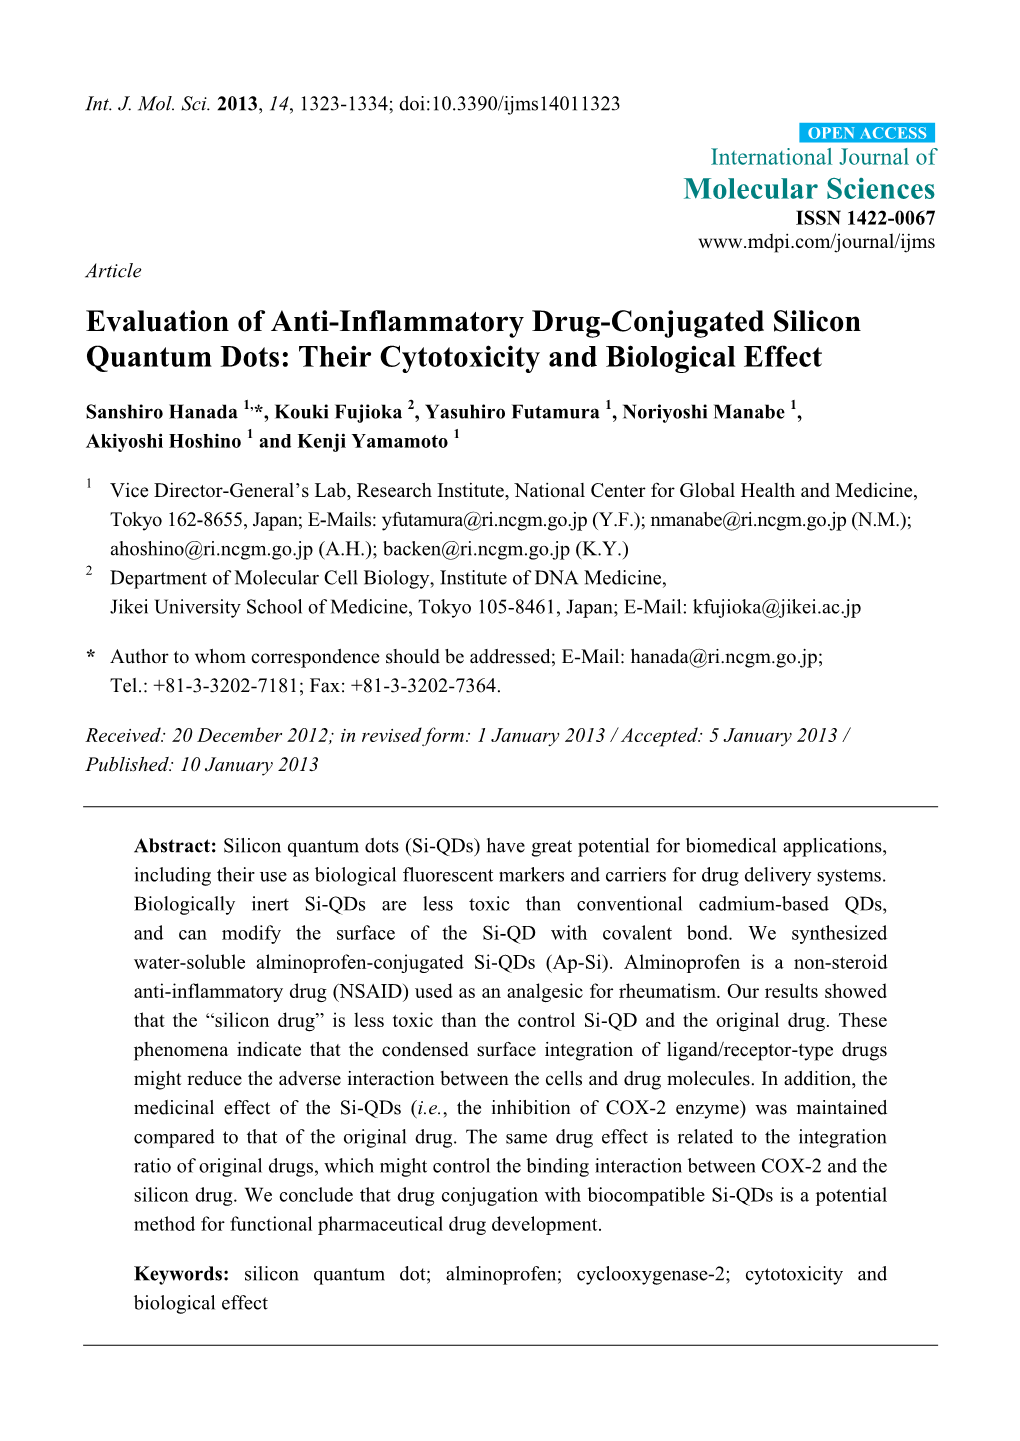 Evaluation of Anti-Inflammatory Drug-Conjugated Silicon Quantum Dots: Their Cytotoxicity and Biological Effect